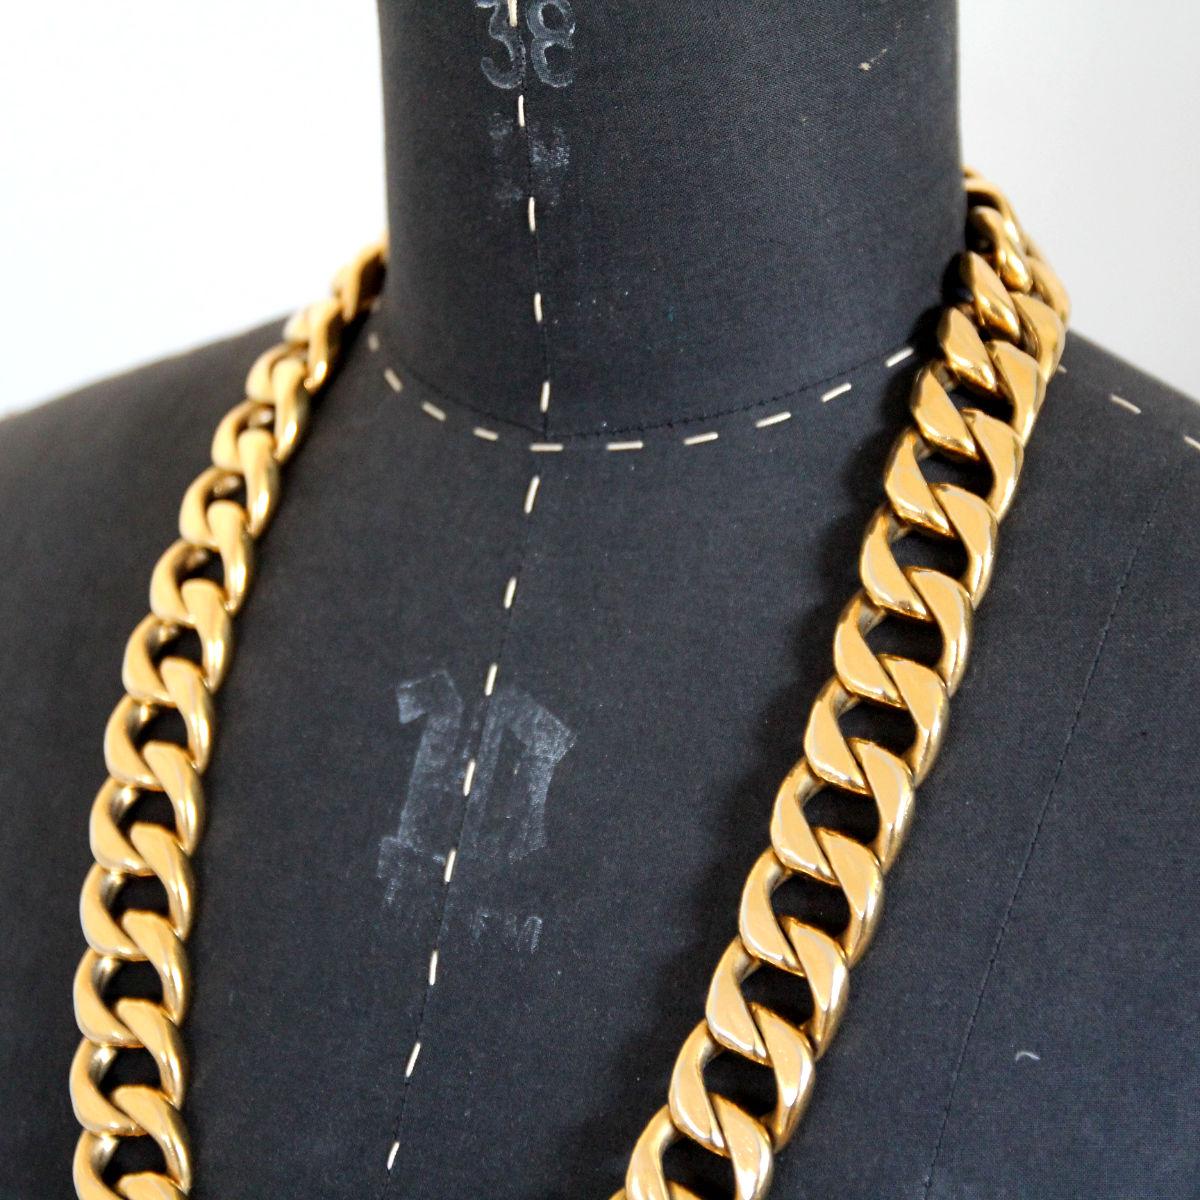 Women's or Men's CHANEL 1990s Gold Toned Jumbo Chain Belt / Necklace With Chanel Plaque